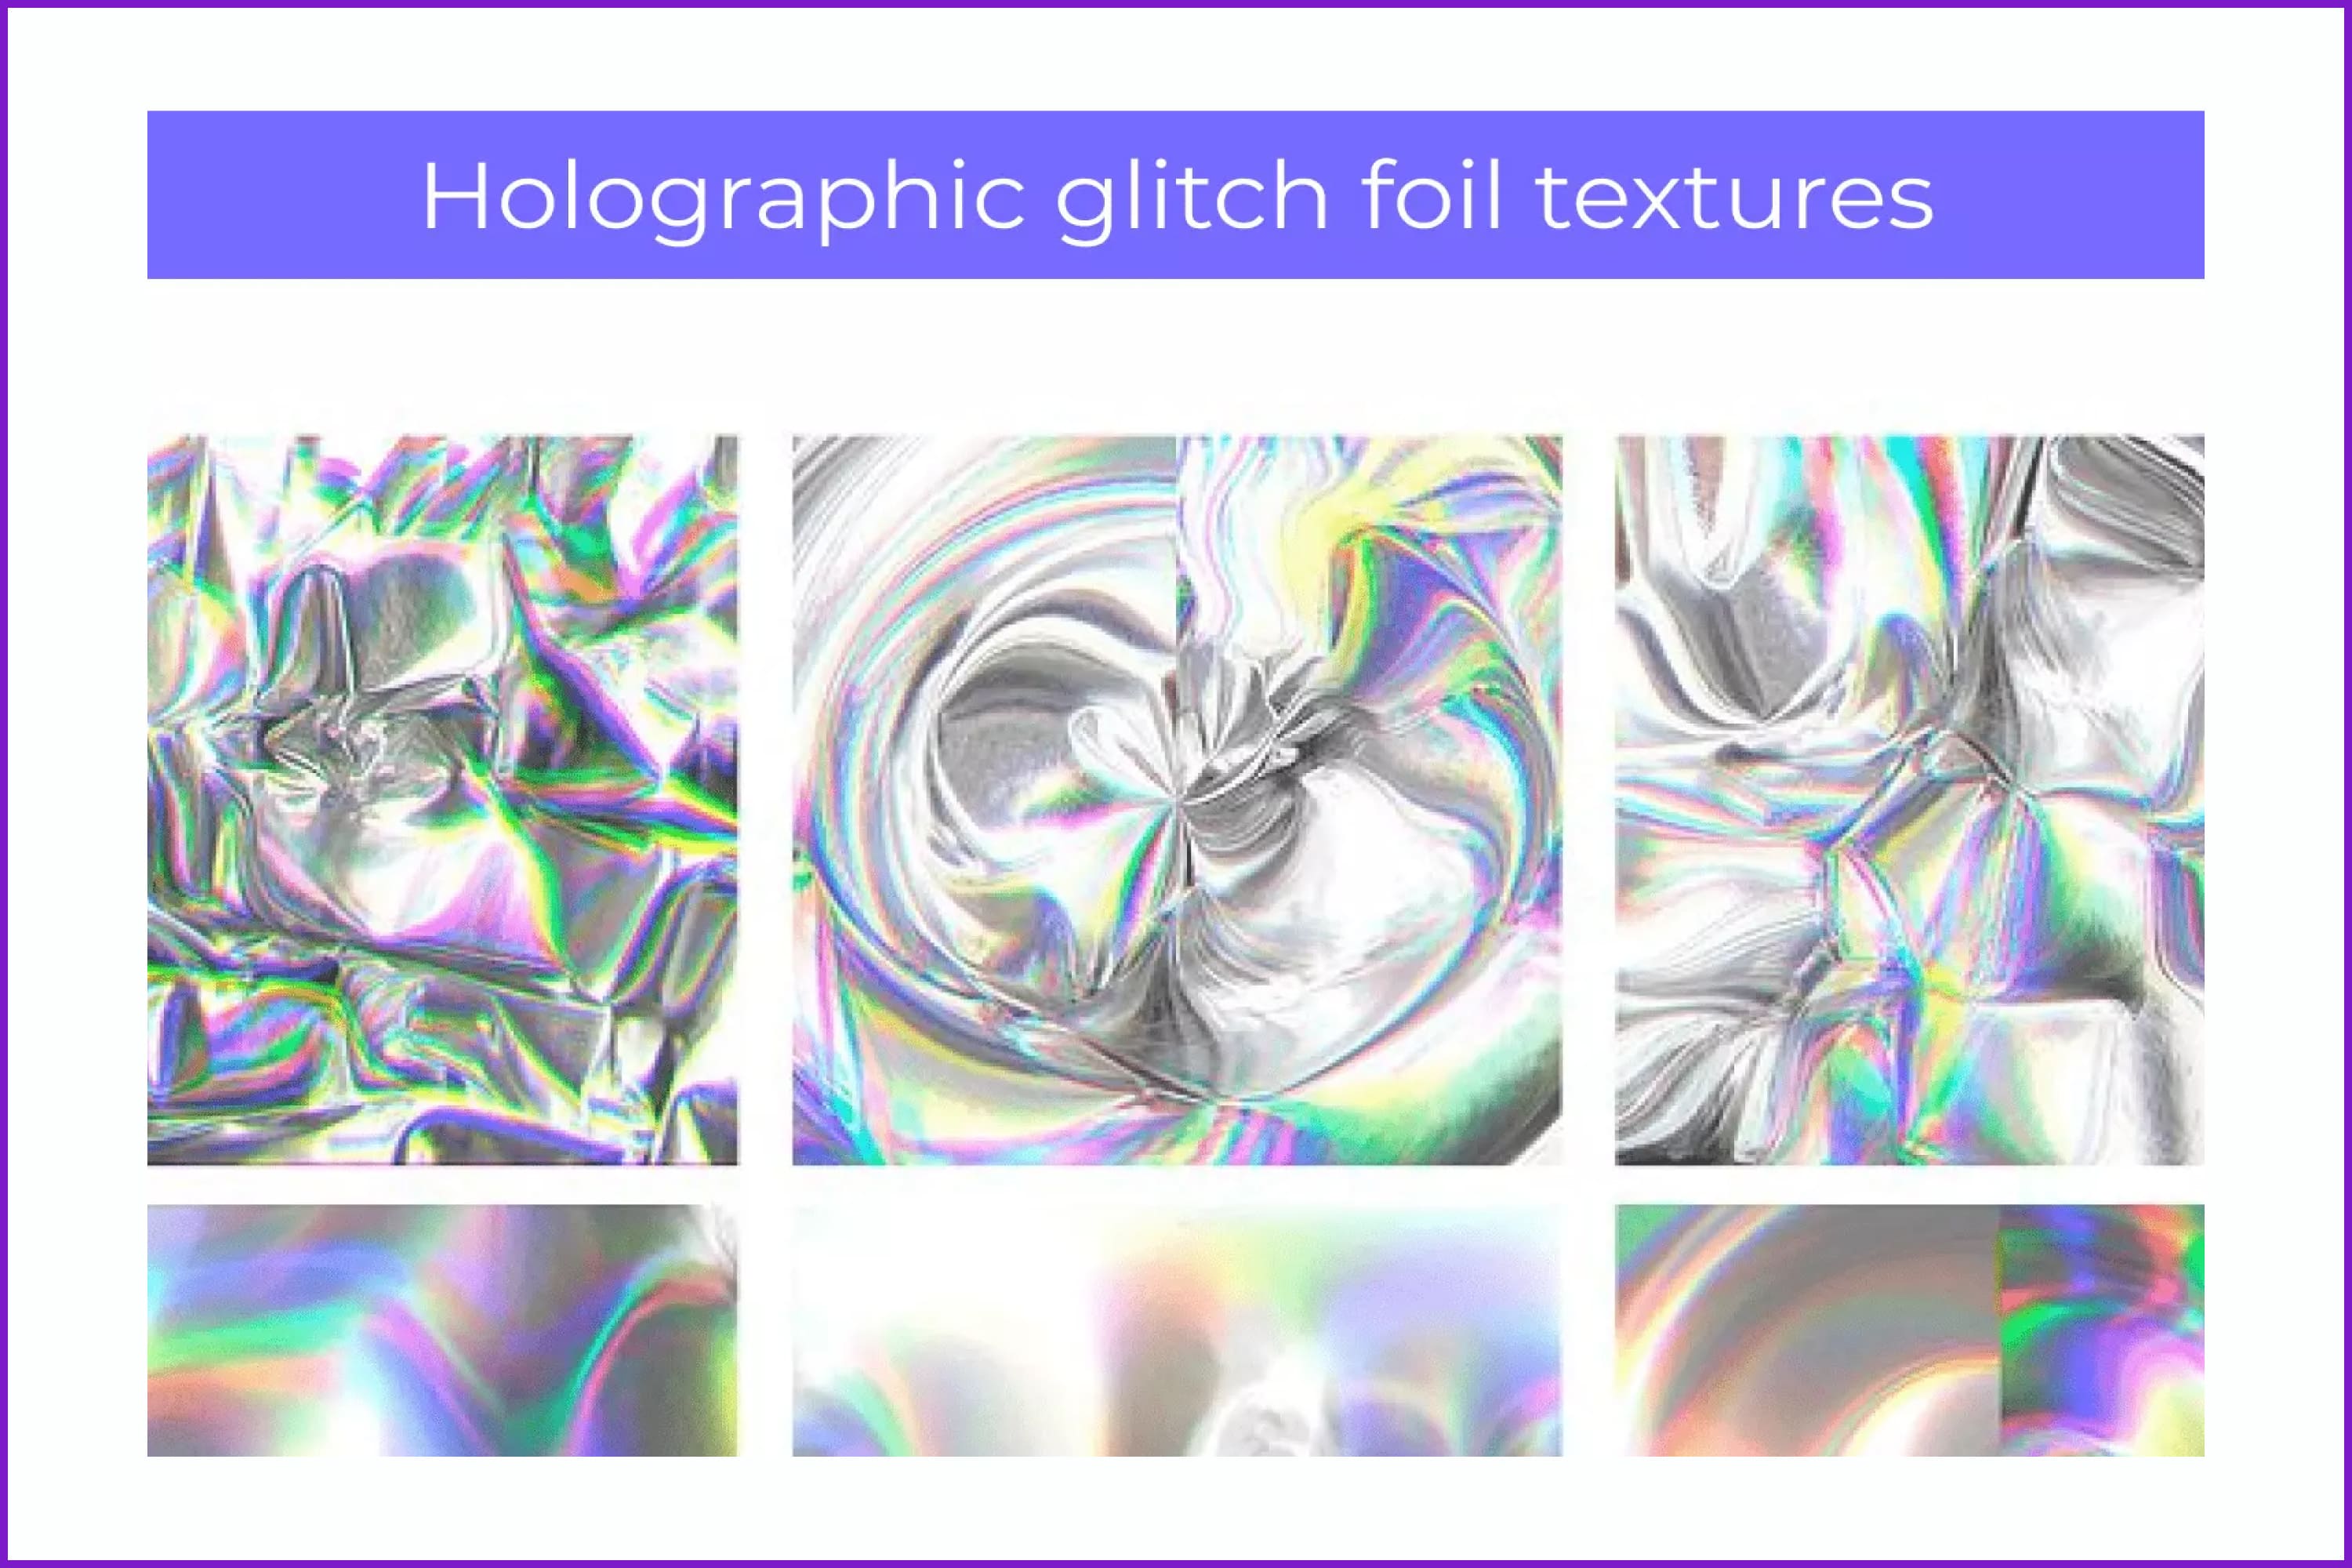 Collage with Holographic Glitch Foil Textures.